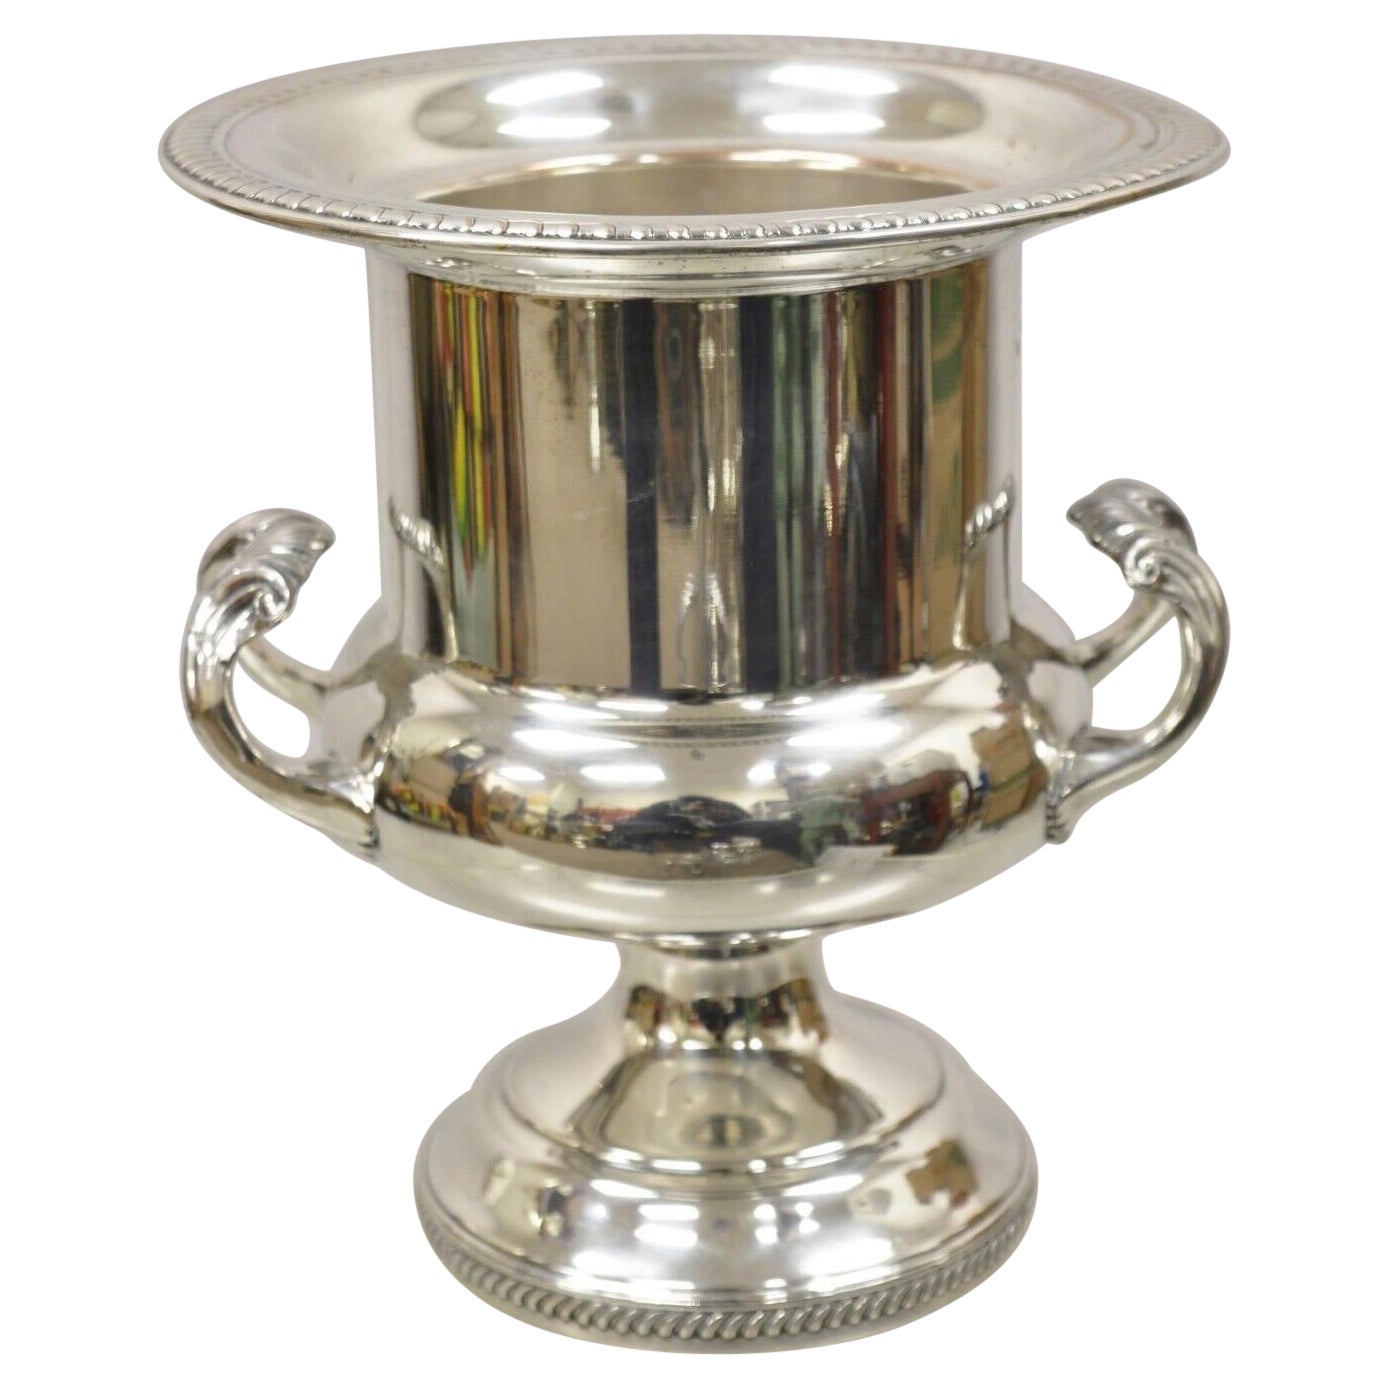 FB Rogers Silver Plated Regency Style Trophy Cup Champagne Chiller Ice Bucket